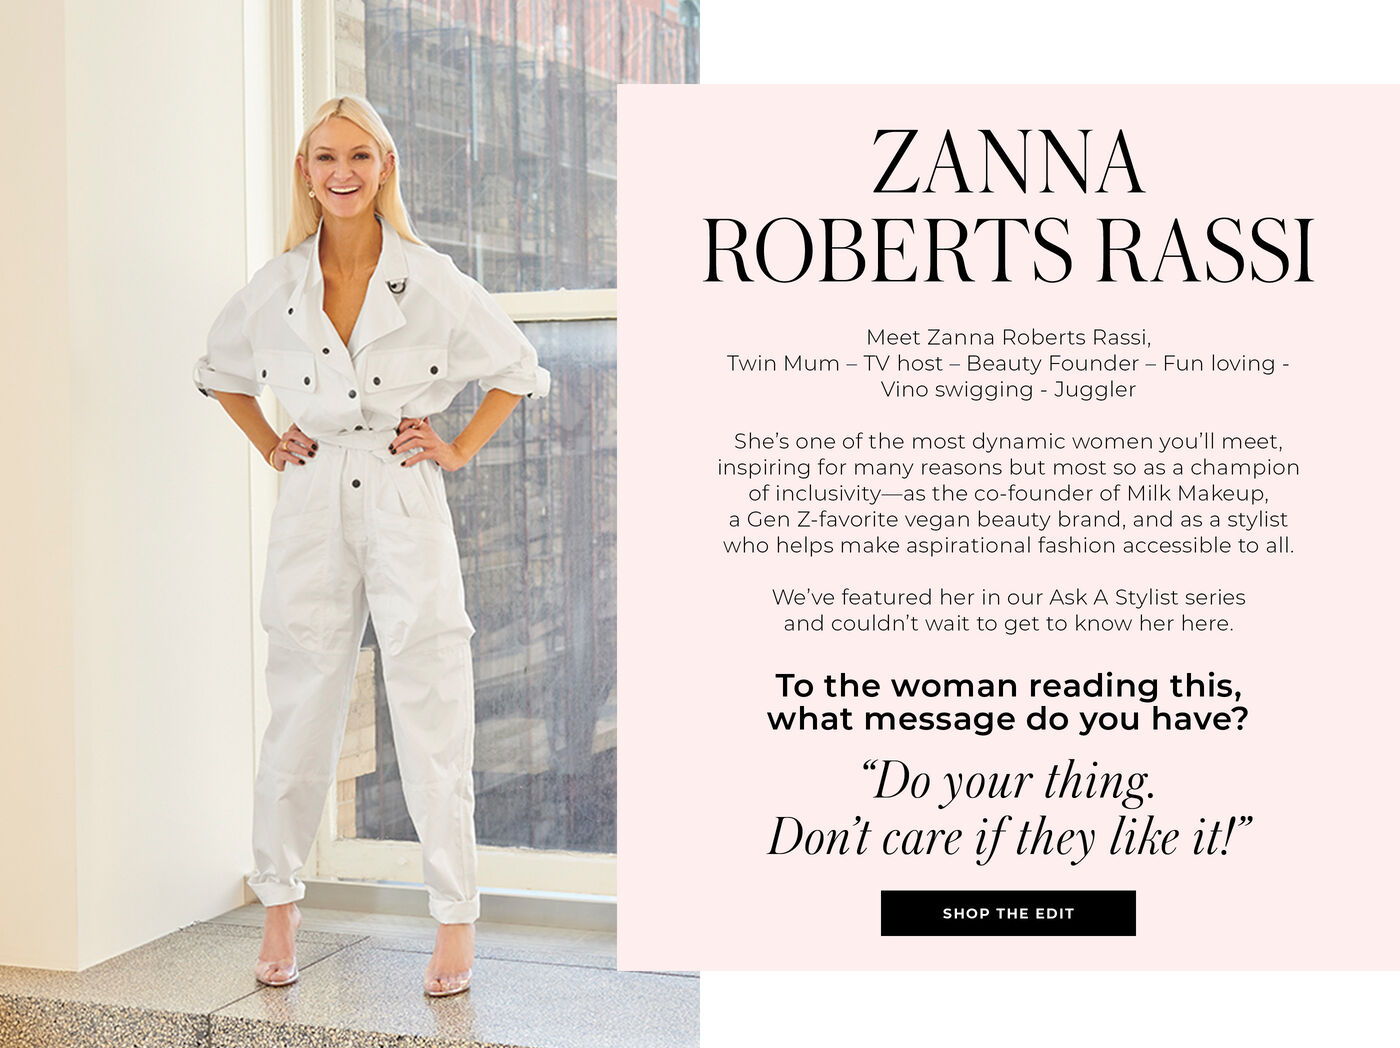 "ZANNA ROBERTS RASSI Meet Zanna Roberts Rassi, Twin Mum - TV host - Beauty Founder - Fun loving- Vino swigging - Juggler She's one of the most dynamic women you'll meet, inspiring for many reasons but most so as a champion of exclusivity--as the co-founder of Milk Makeup, a Gen Z-favorite vegan beauty brand, and as a stylist who helps make aspirational fashion accessible to all. We've featured her in our Ask A Stylist series and couldn't wait to get to know her here. To the woman reading this, what message do you have? ""Do your thing. Don't care if they like it!"""